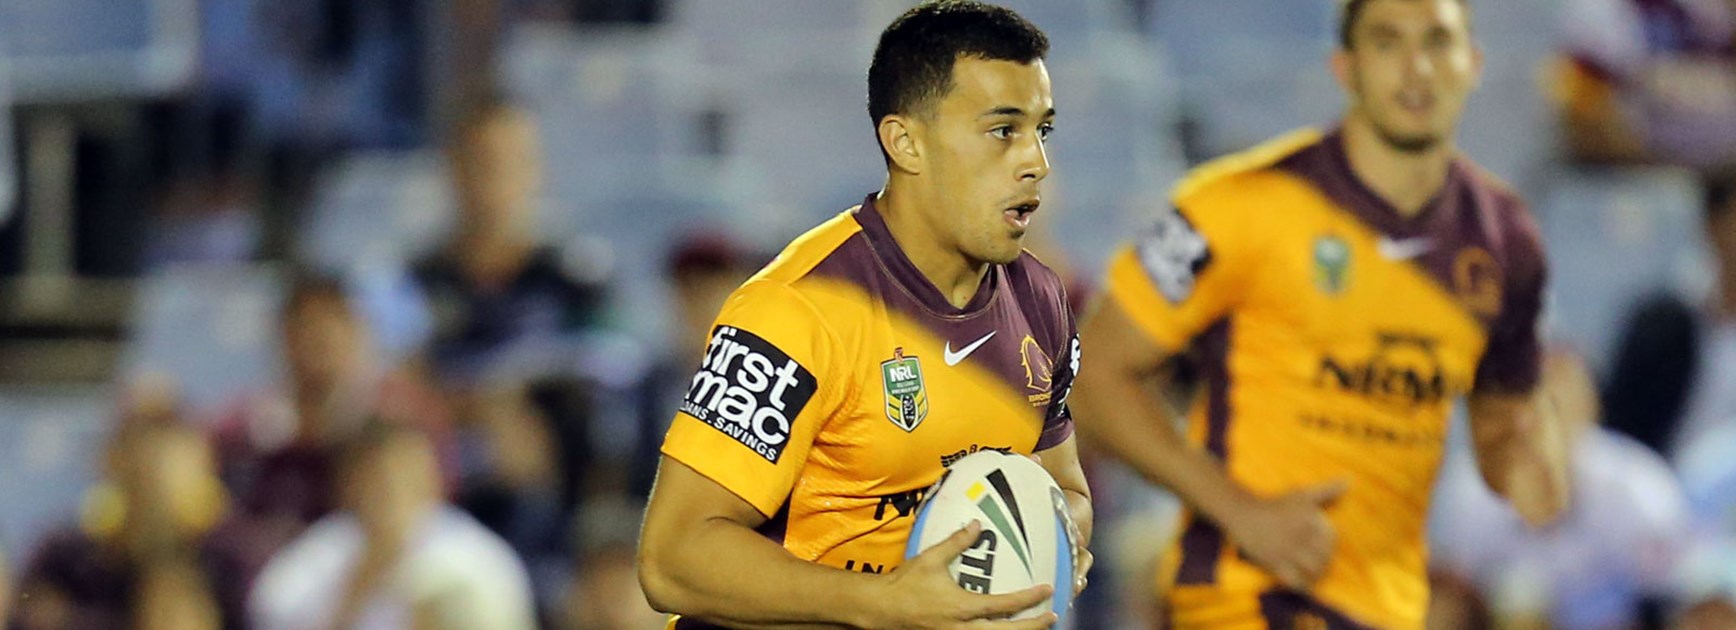 Broncos fullback Jordan Kahu put on a faultless display against the Sharks in Round 2.